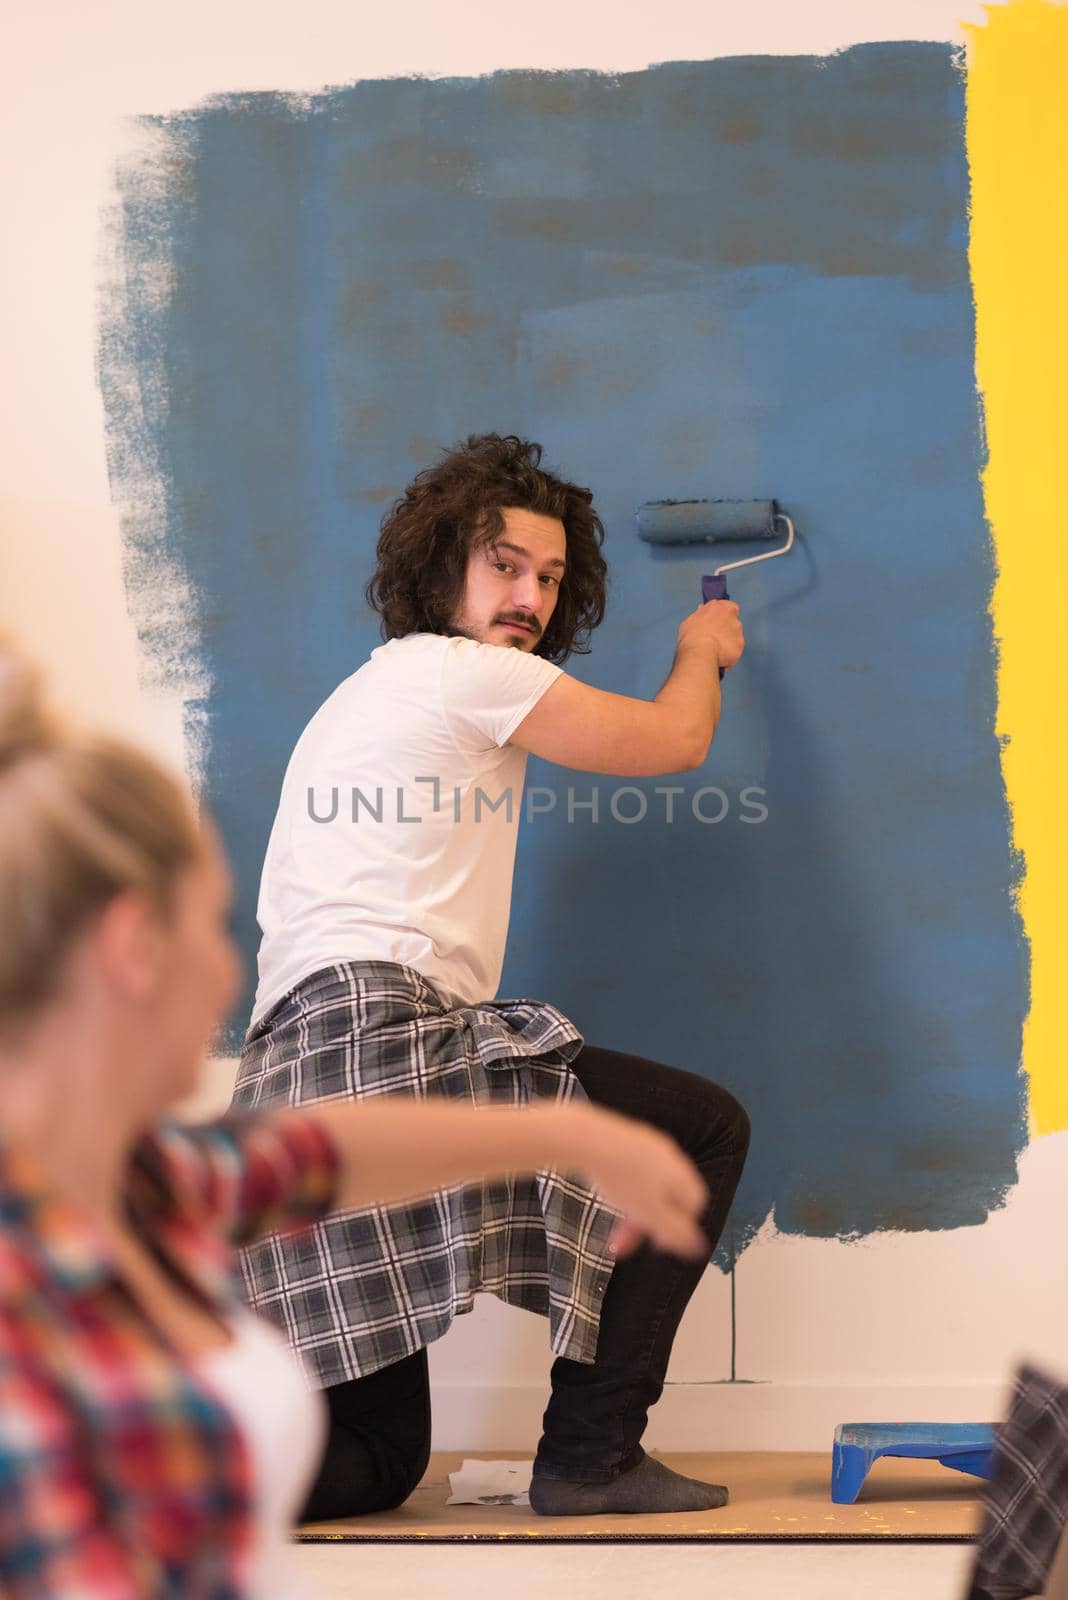 Happy couple doing home renovations, the man is painting the room and the woman is relaxing on the floor and connecting with a laptop